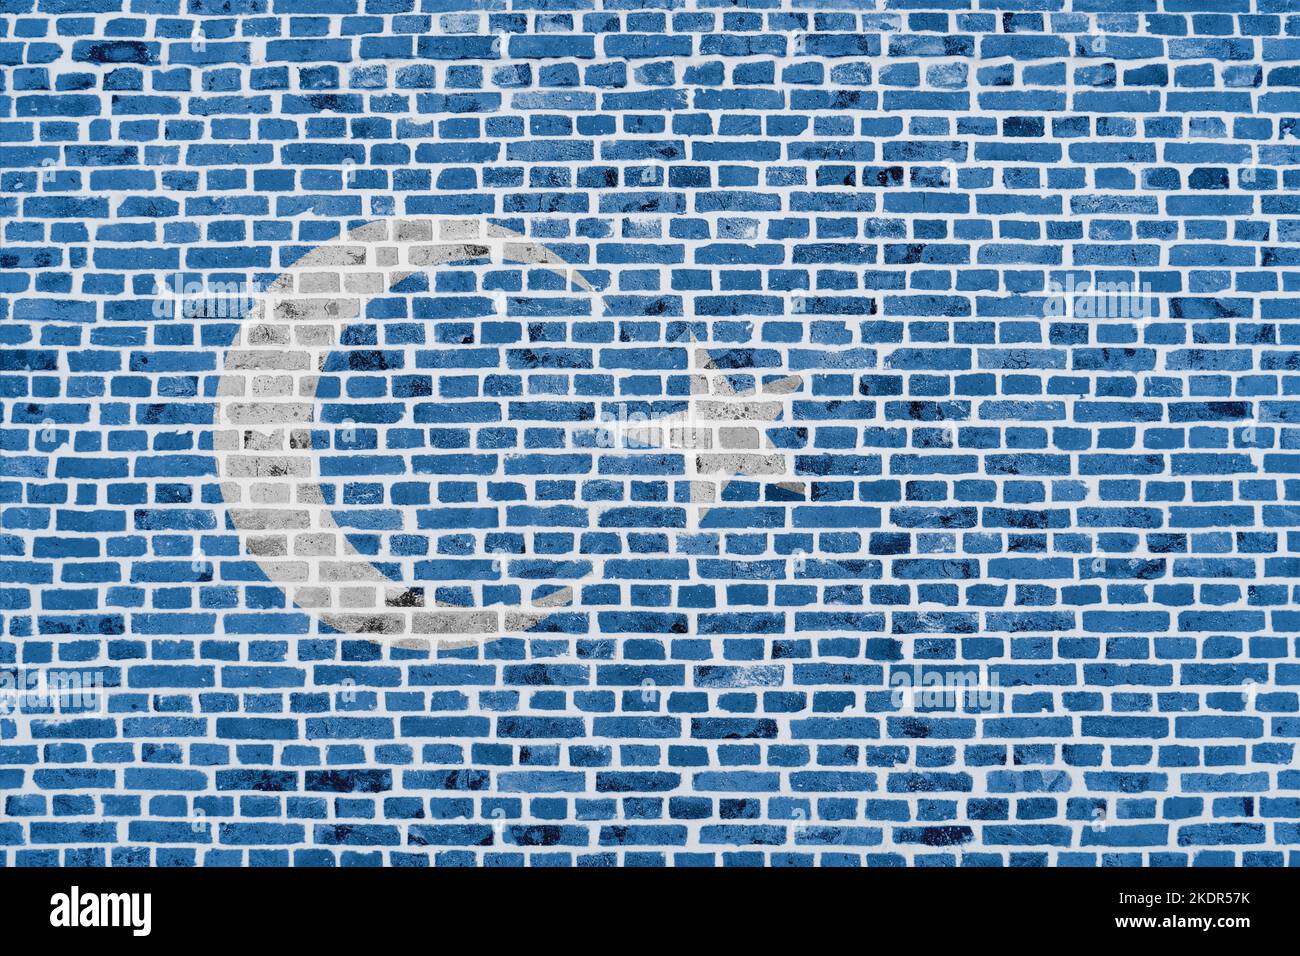 Close-up on a brick wall with the flag of Uyghur painted on it. Stock Photo